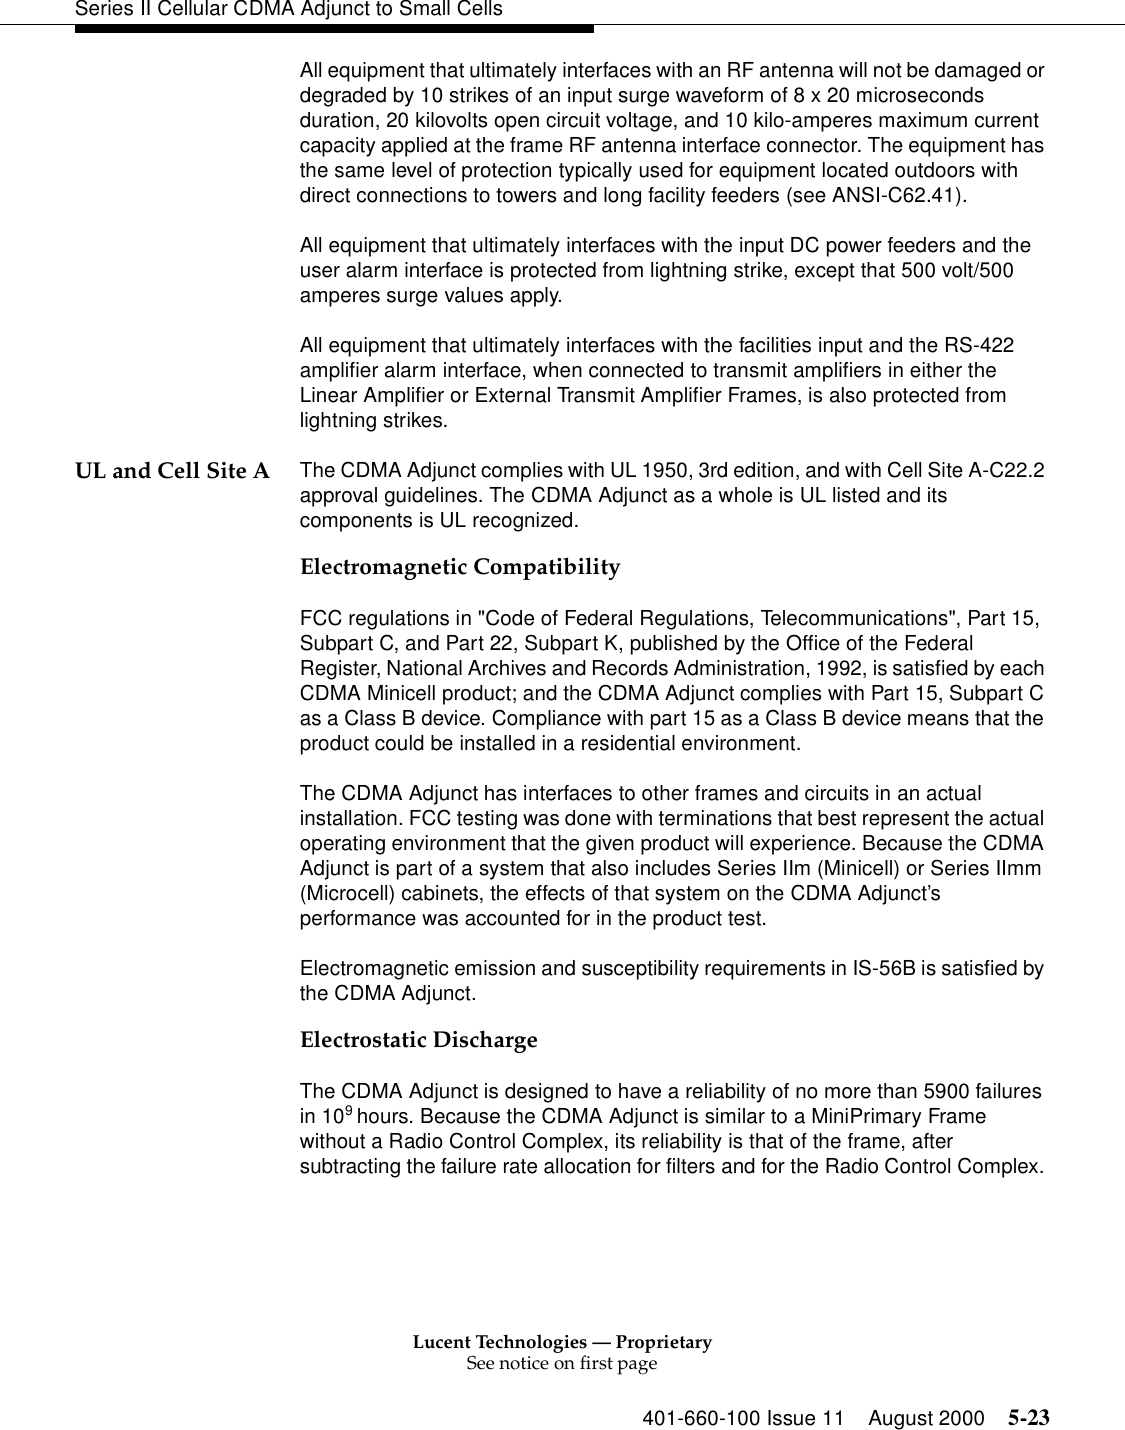 Lucent Technologies — ProprietarySee notice on first page401-660-100 Issue 11 August 2000 5-23Series II Cellular CDMA Adjunct to Small CellsAll equipment that ultimately interfaces with an RF antenna will not be damaged or degraded by 10 strikes of an input surge waveform of 8 x 20 microseconds duration, 20 kilovolts open circuit voltage, and 10 kilo-amperes maximum current capacity applied at the frame RF antenna interface connector. The equipment has the same level of protection typically used for equipment located outdoors with direct connections to towers and long facility feeders (see ANSI-C62.41).All equipment that ultimately interfaces with the input DC power feeders and the user alarm interface is protected from lightning strike, except that 500 volt/500 amperes surge values apply. All equipment that ultimately interfaces with the facilities input and the RS-422 amplifier alarm interface, when connected to transmit amplifiers in either the Linear Amplifier or External Transmit Amplifier Frames, is also protected from lightning strikes.UL and Cell Site A The CDMA Adjunct complies with UL 1950, 3rd edition, and with Cell Site A-C22.2 approval guidelines. The CDMA Adjunct as a whole is UL listed and its components is UL recognized.Electromagnetic Compatibility FCC regulations in &quot;Code of Federal Regulations, Telecommunications&quot;, Part 15, Subpart C, and Part 22, Subpart K, published by the Office of the Federal Register, National Archives and Records Administration, 1992, is satisfied by each CDMA Minicell product; and the CDMA Adjunct complies with Part 15, Subpart C as a Class B device. Compliance with part 15 as a Class B device means that the product could be installed in a residential environment.The CDMA Adjunct has interfaces to other frames and circuits in an actual installation. FCC testing was done with terminations that best represent the actual operating environment that the given product will experience. Because the CDMA Adjunct is part of a system that also includes Series IIm (Minicell) or Series IImm (Microcell) cabinets, the effects of that system on the CDMA Adjunct’s performance was accounted for in the product test.Electromagnetic emission and susceptibility requirements in IS-56B is satisfied by the CDMA Adjunct. Electrostatic DischargeThe CDMA Adjunct is designed to have a reliability of no more than 5900 failures in 109 hours. Because the CDMA Adjunct is similar to a MiniPrimary Frame without a Radio Control Complex, its reliability is that of the frame, after subtracting the failure rate allocation for filters and for the Radio Control Complex. 